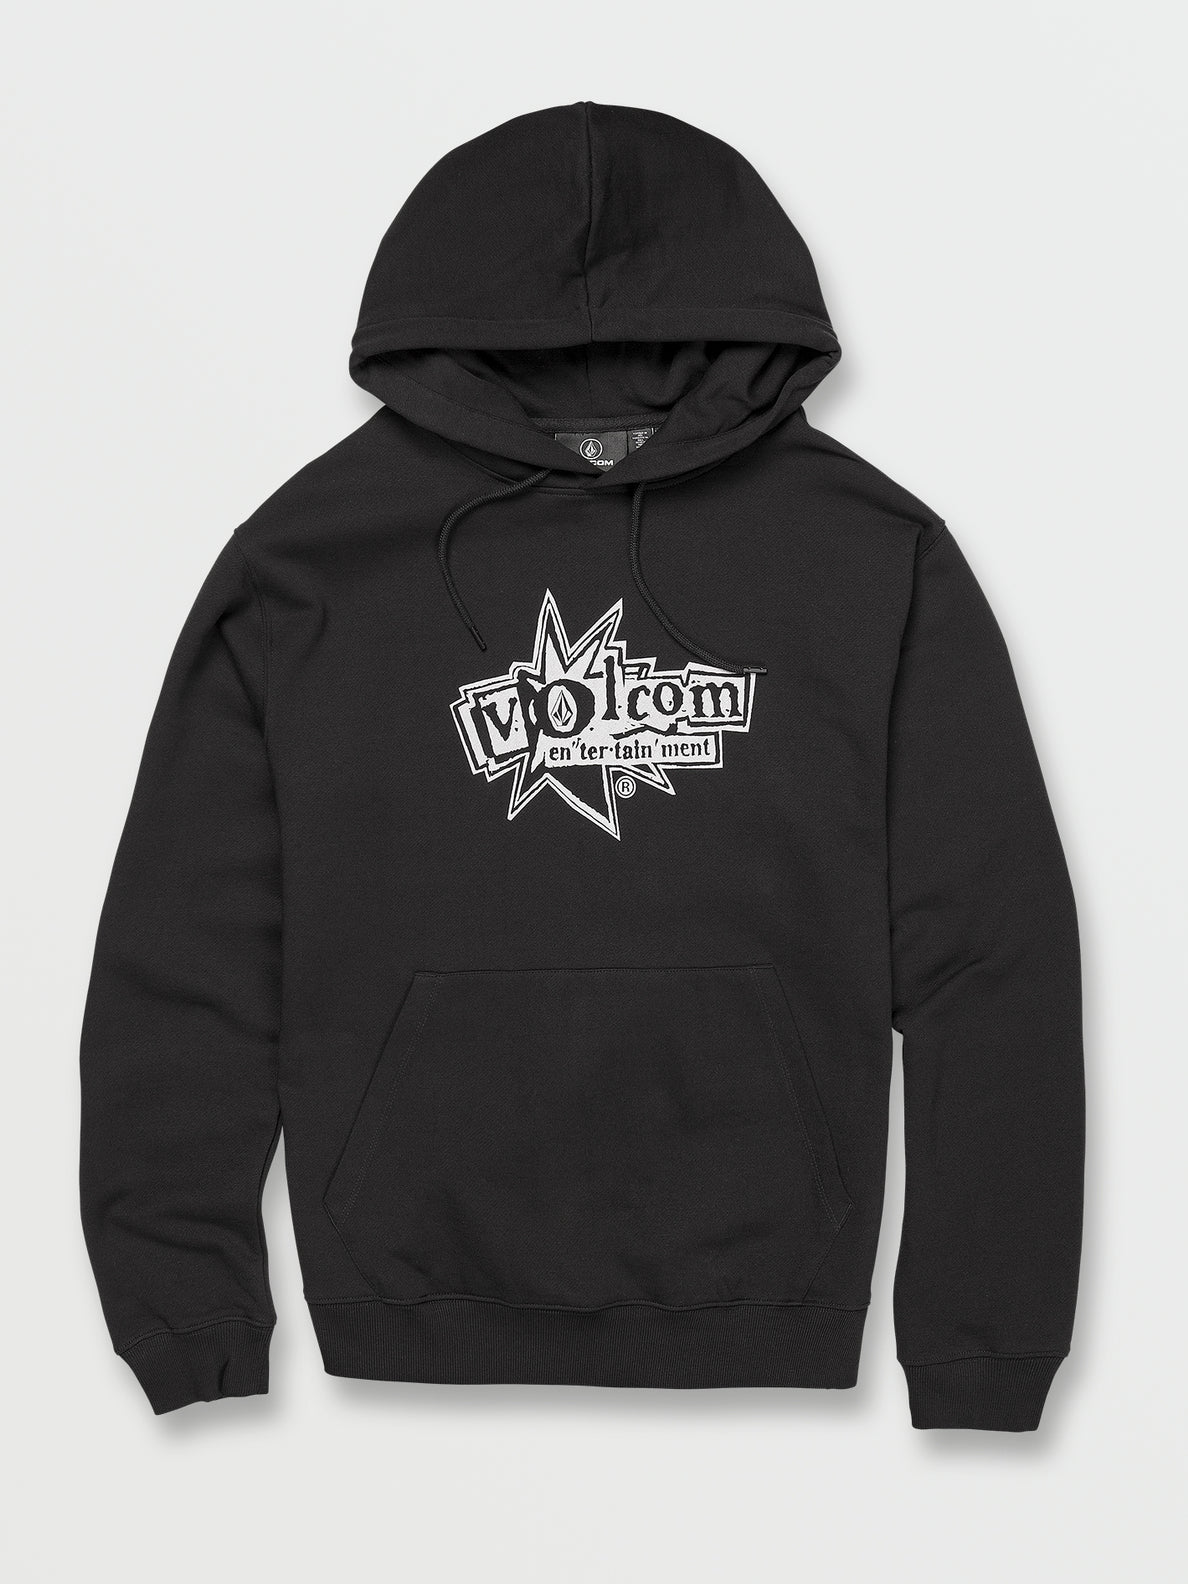 Volcom Entertainment Pullover Hoodie - Black (A4112302_BLK) [F]